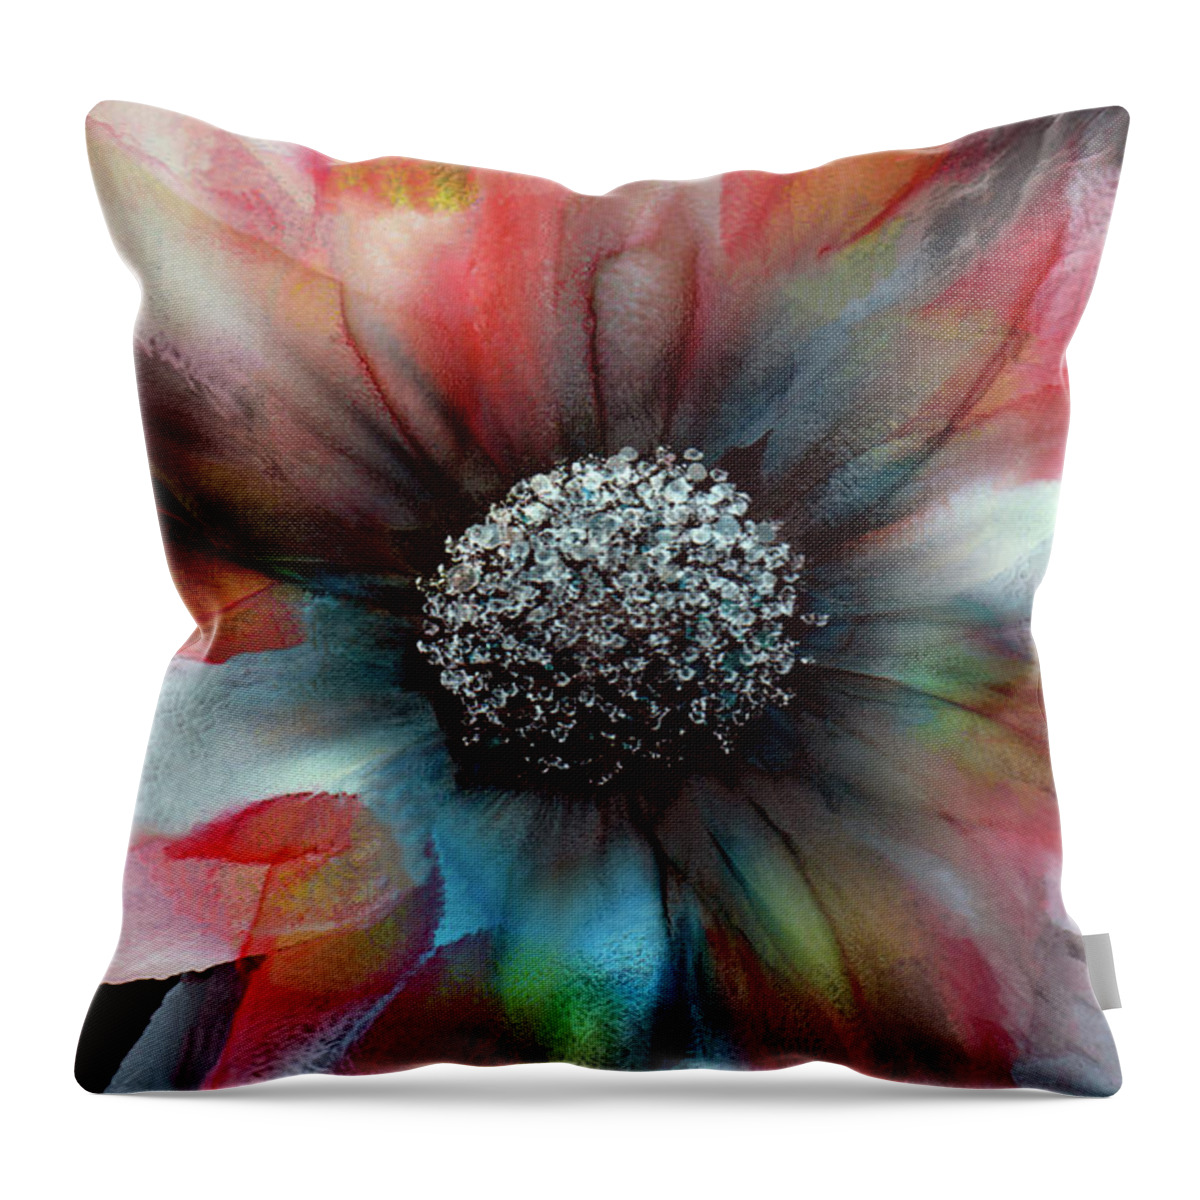 Floral Throw Pillow featuring the painting Plant A Garden by Kimberly Deene Langlois